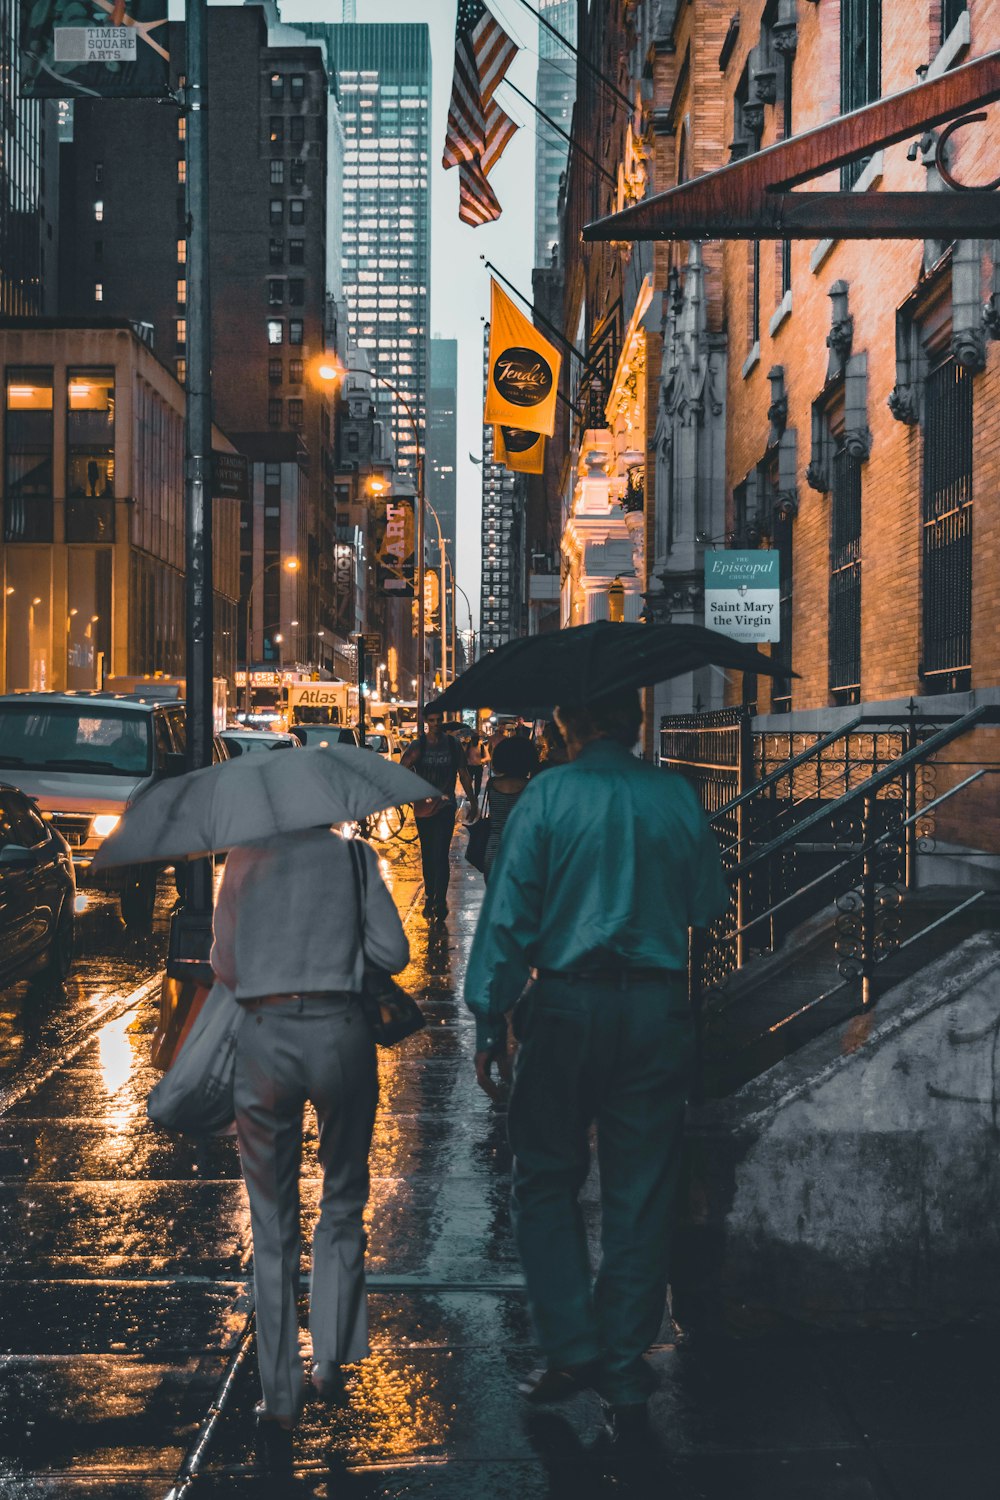 two man and woman walking near each other while holding umbrella during rain near buildings